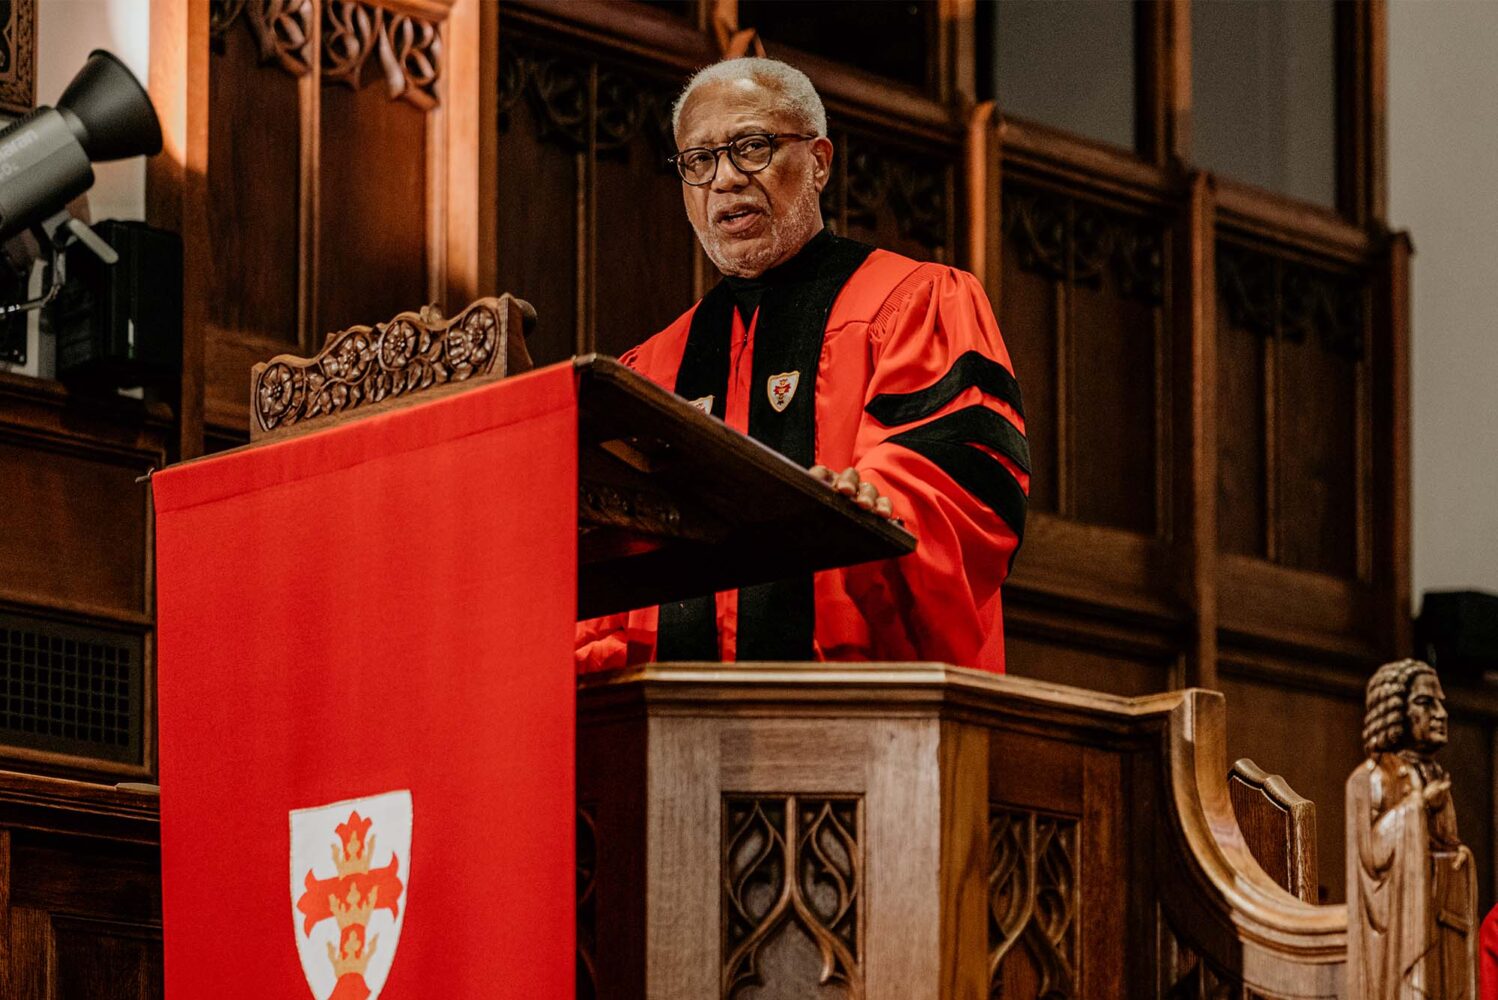 Photo: A man in a red gown gives a speech at a podium draped in a red covering. Baccalaureate speaker Walter E. Fluker (GRS’88, STH’88) told Boston University’s Class of 2024 graduates Sunday to follow the example of BU’s most famous alumnus, Martin Luther King, Jr., in striving for peace and justice. Photo by Kelly Davidson